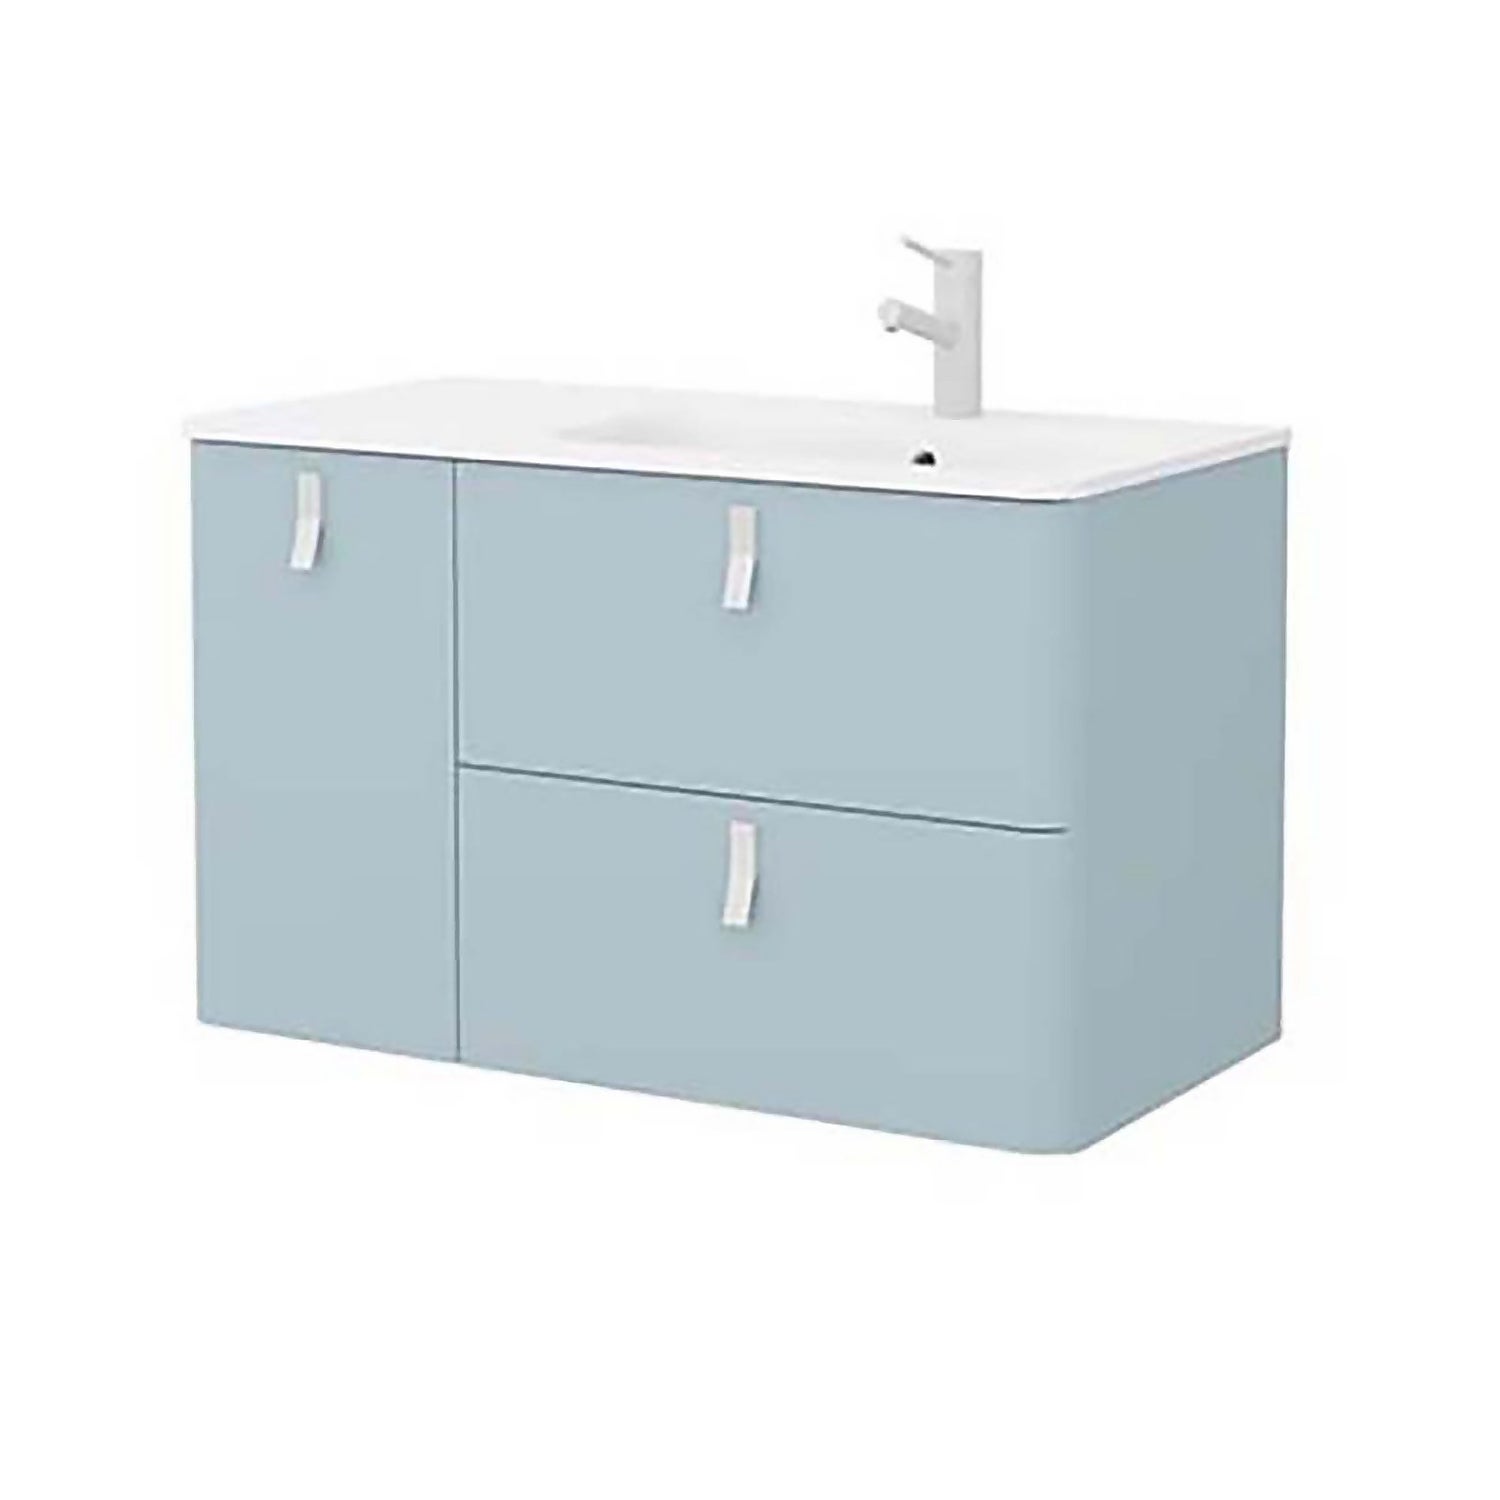 Sketch 900 Left Hand Inset Basin and Unit - Powder Blue